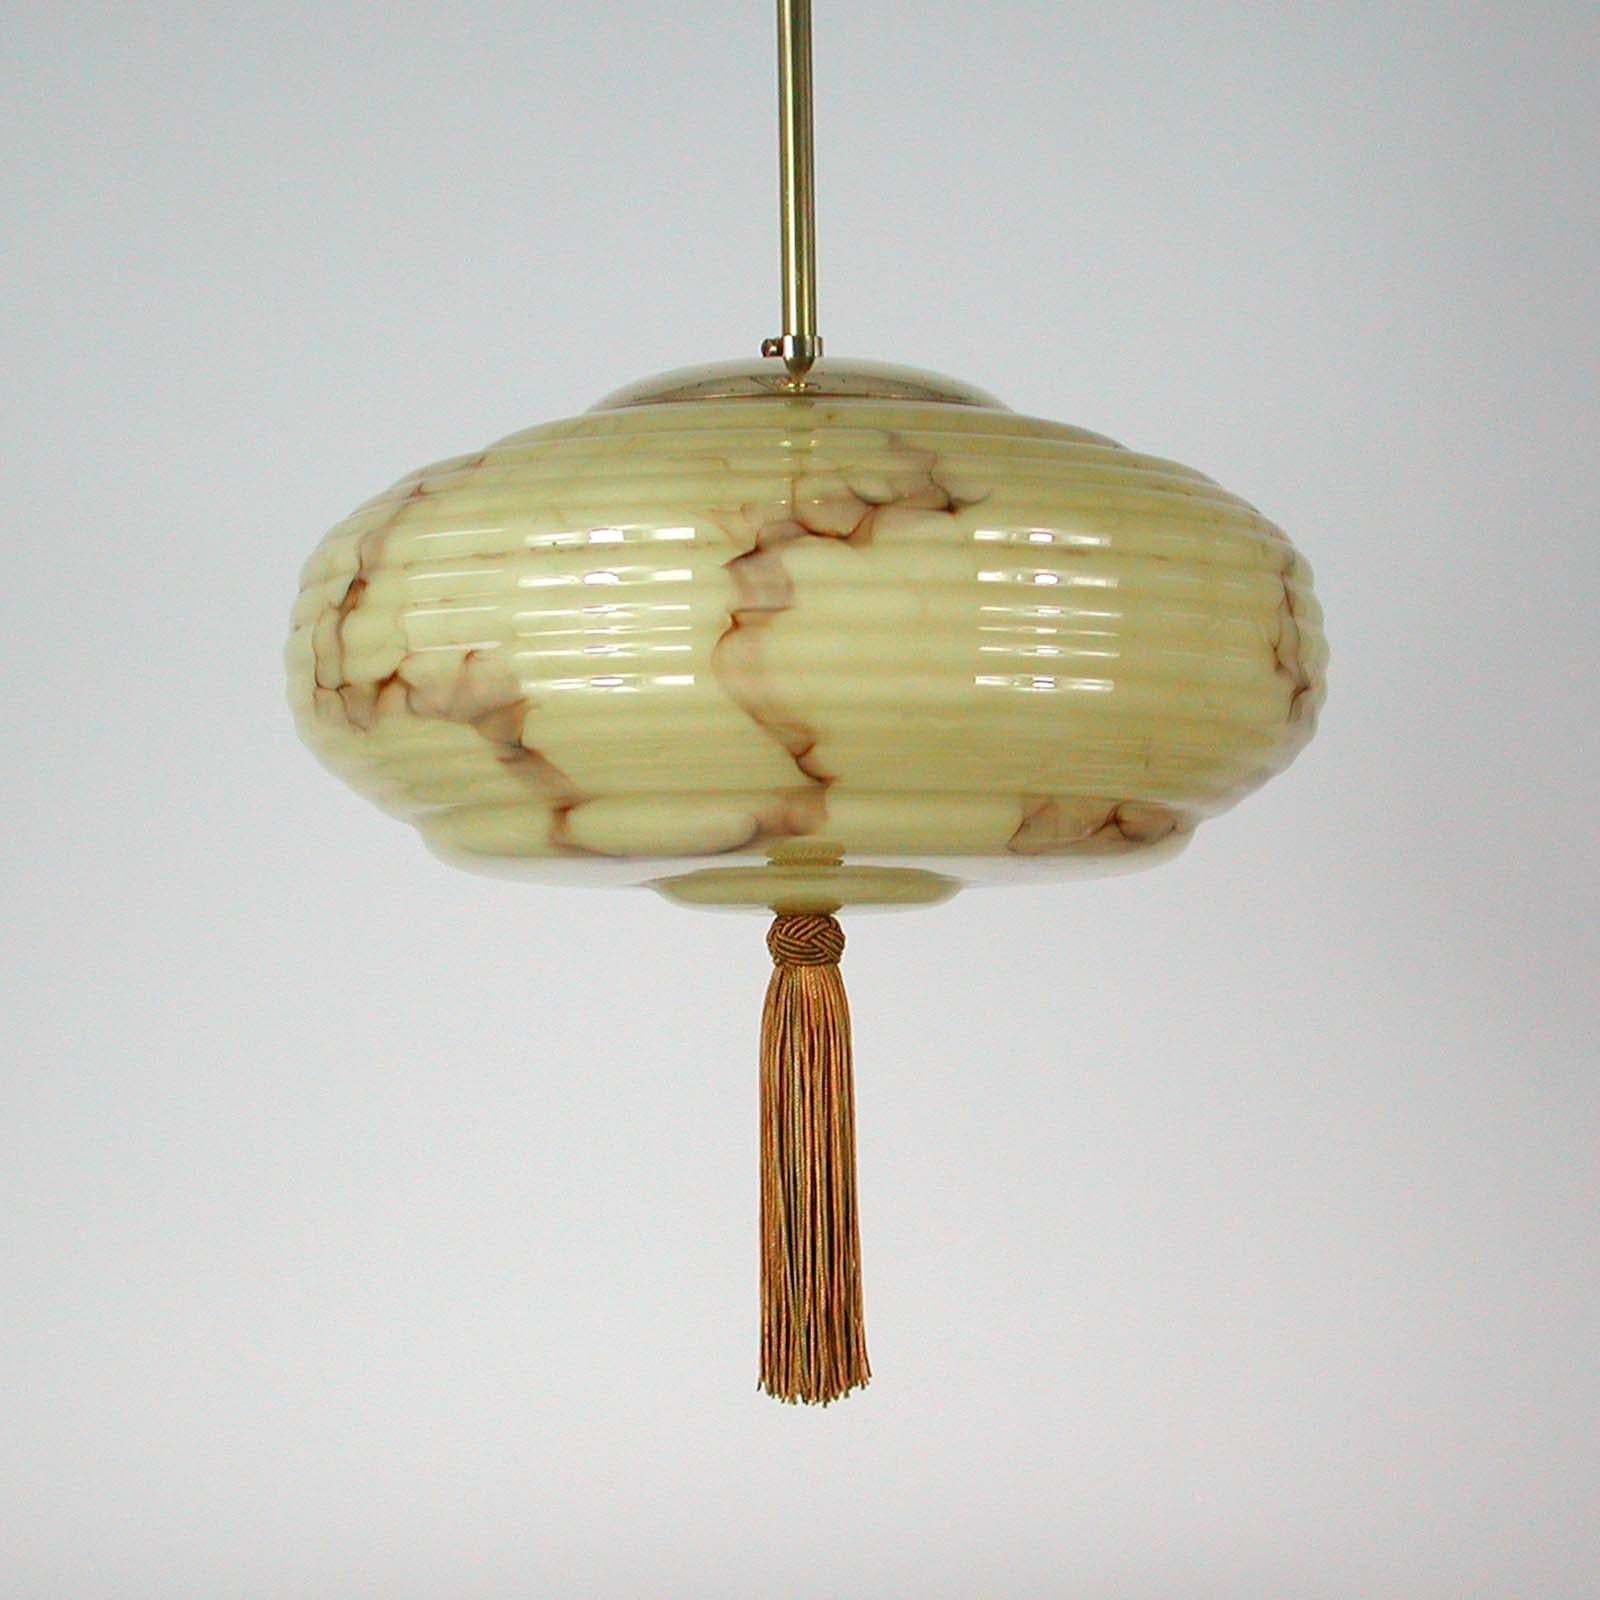 This elegant German pendant was designed and manufactured in Germany in the 1920s-1930s. The light is made of brass and has got a cream colored opaline marbled glass shade in typical Bauhaus Design. Good vintage condition with one E27 socket.

The